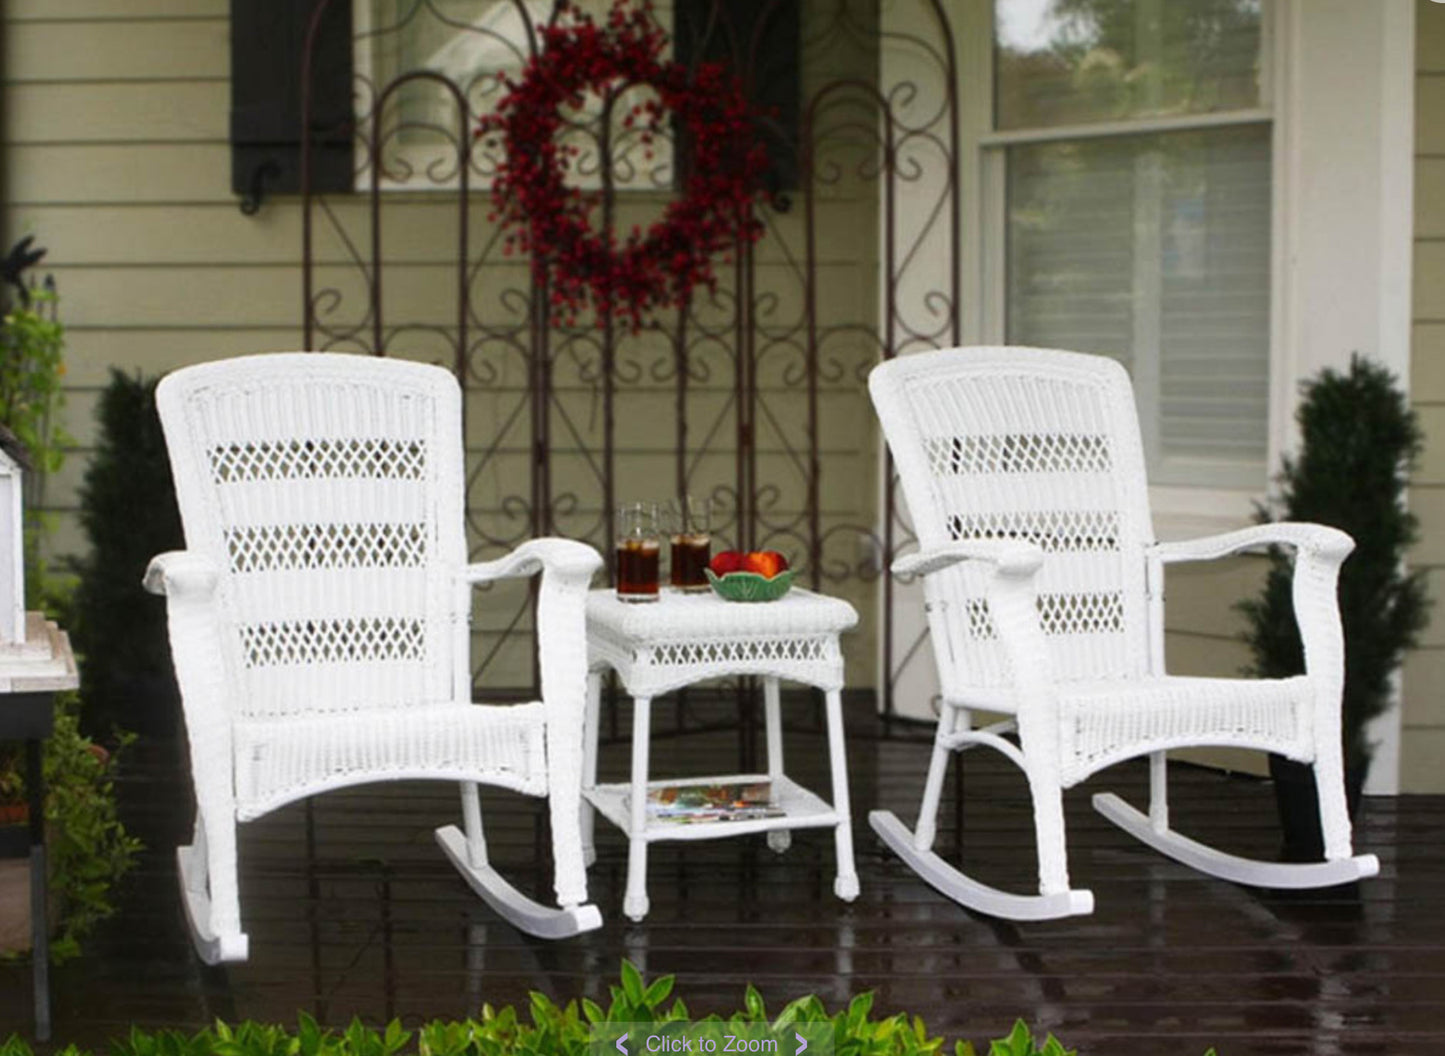 Tortuga- Portside Plantation White Wicker Rocking Chair Outdoor Furniture with Fade-Resistant Navy Cushion. (SET OF 2 Chairs) table not included